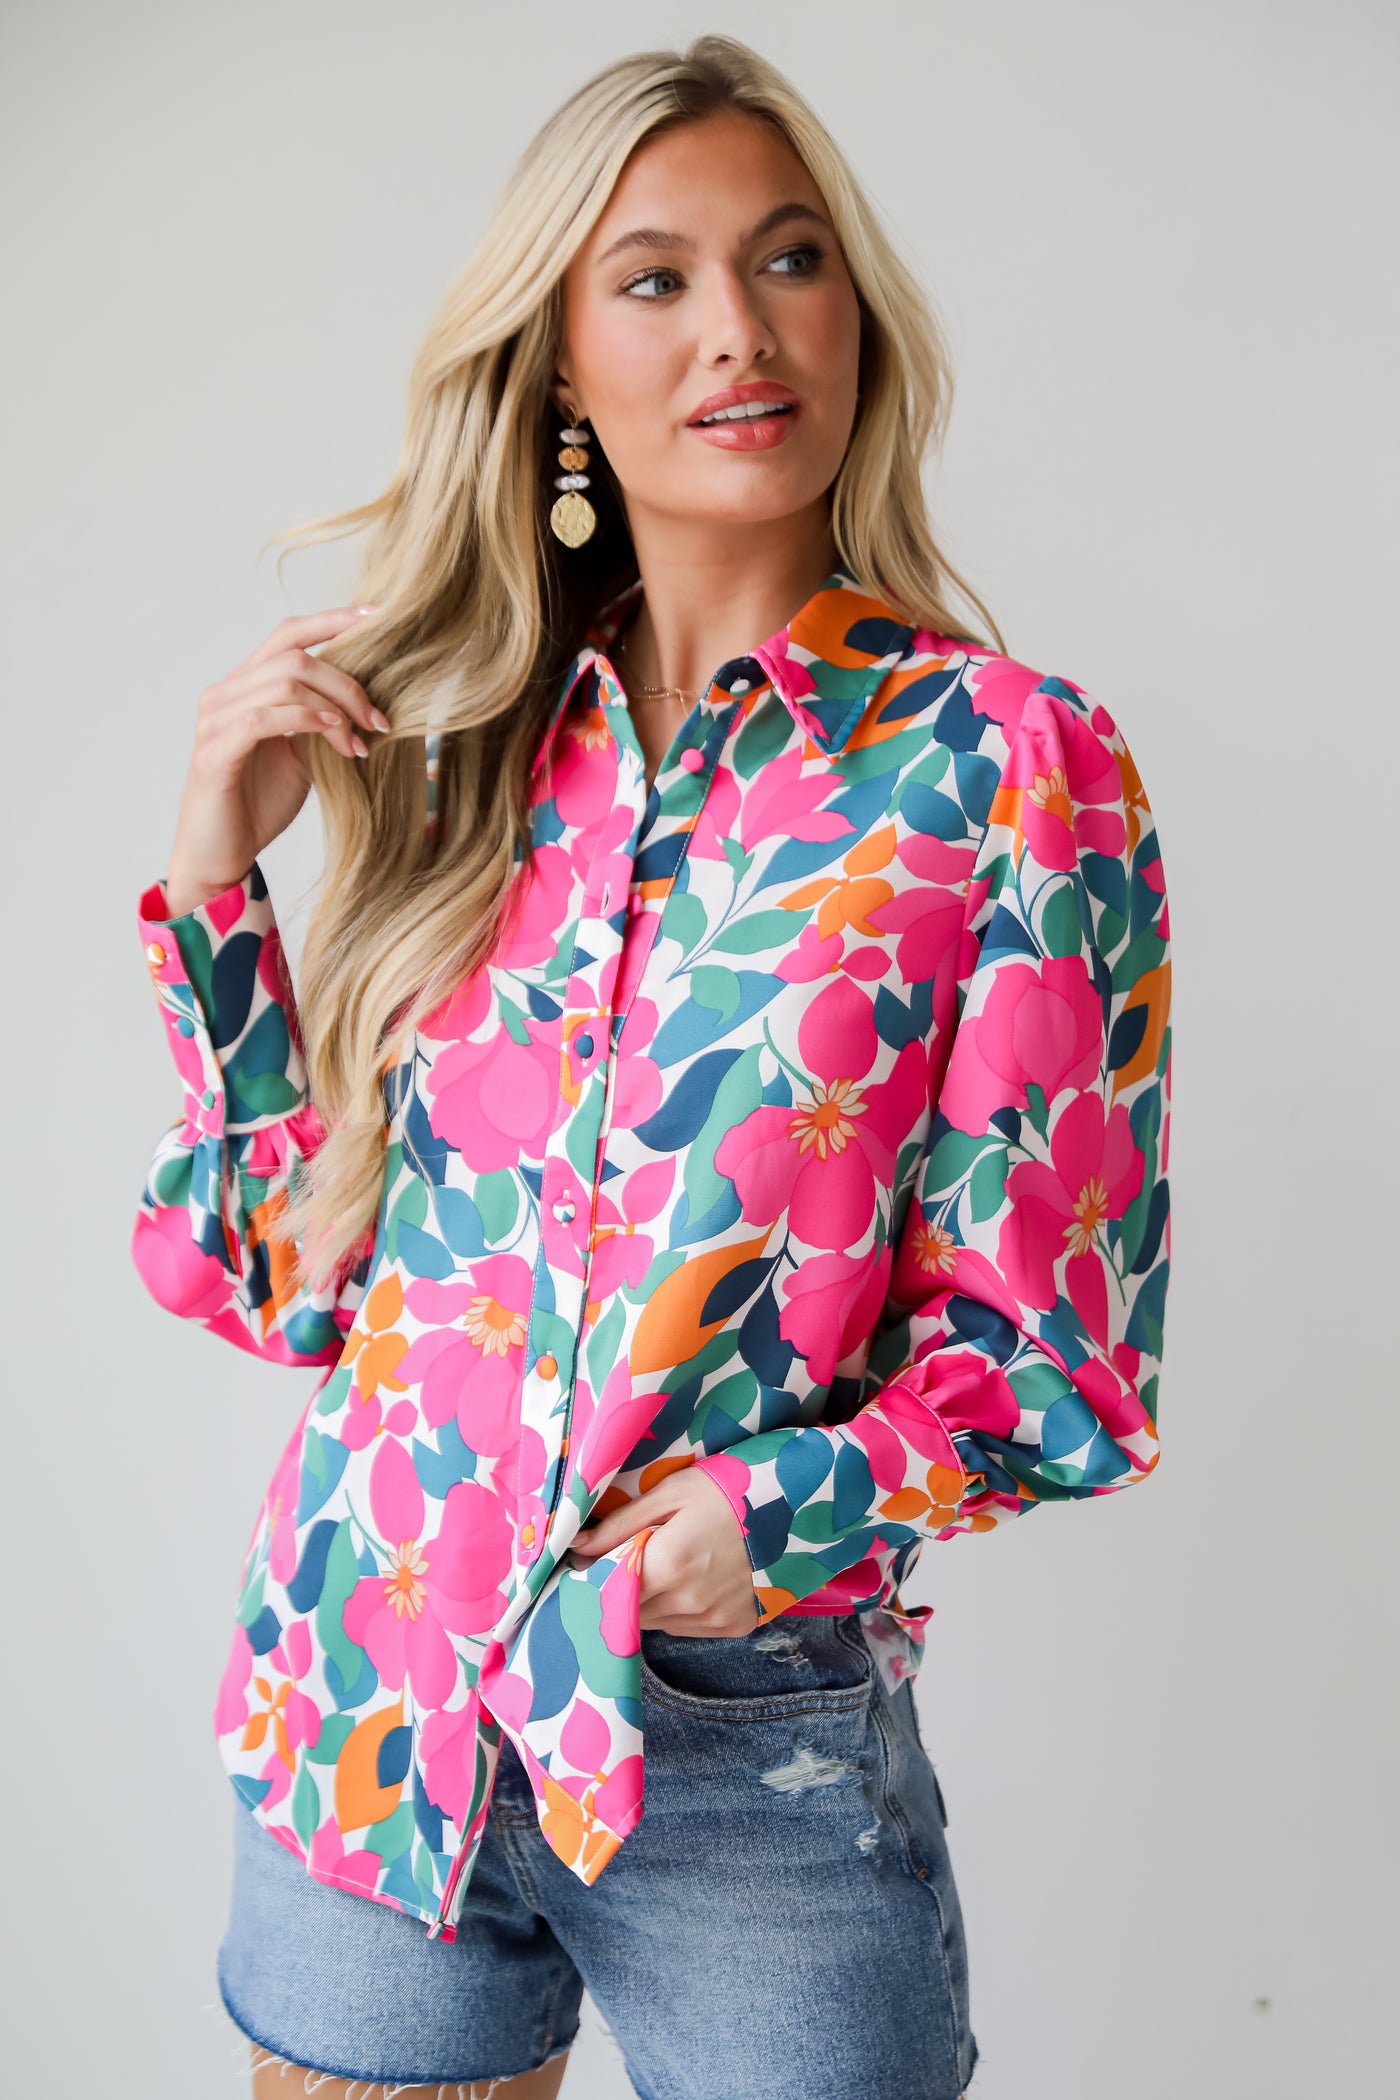 tops for spring Purely Perfection Pink Floral Button-Up Blouse